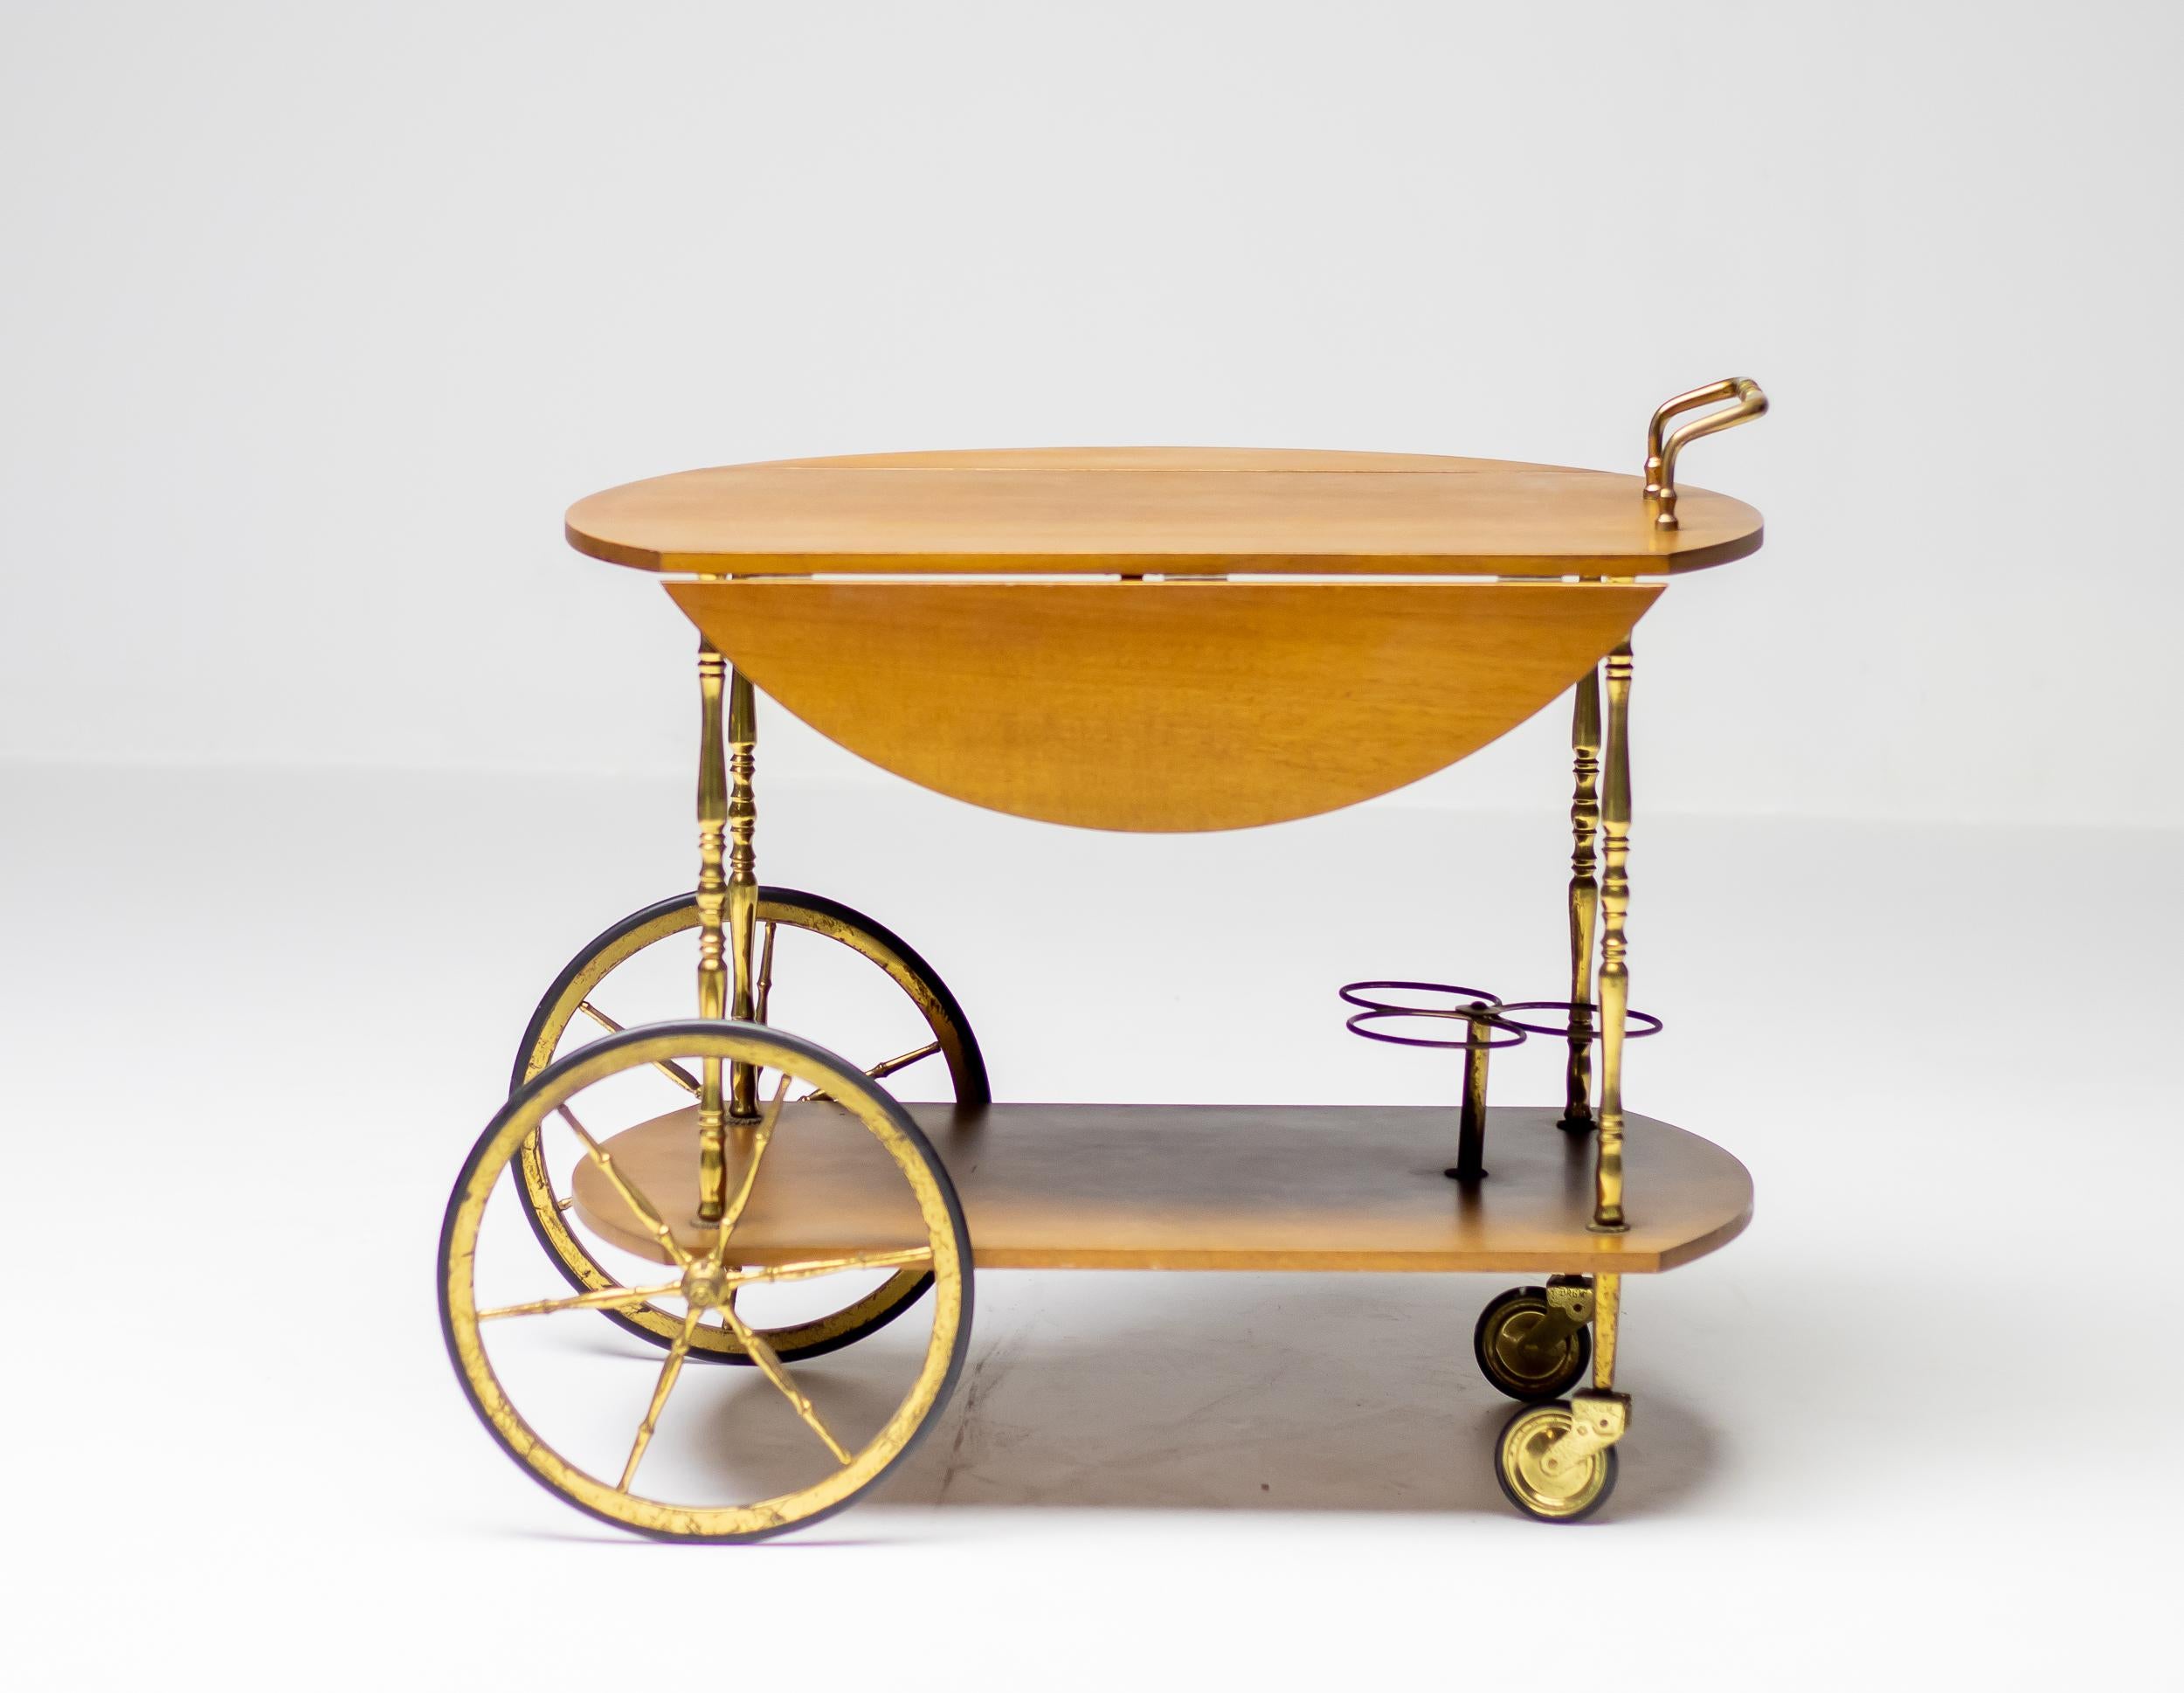 Elegant and practical bar cart attributed to Cesare Lacca, made in Italy, circa 1965. Round walnut drop down top, handles and wheels in brass. The brass shows beautiful age related patina, the walnut top and shelves are in wonderful original